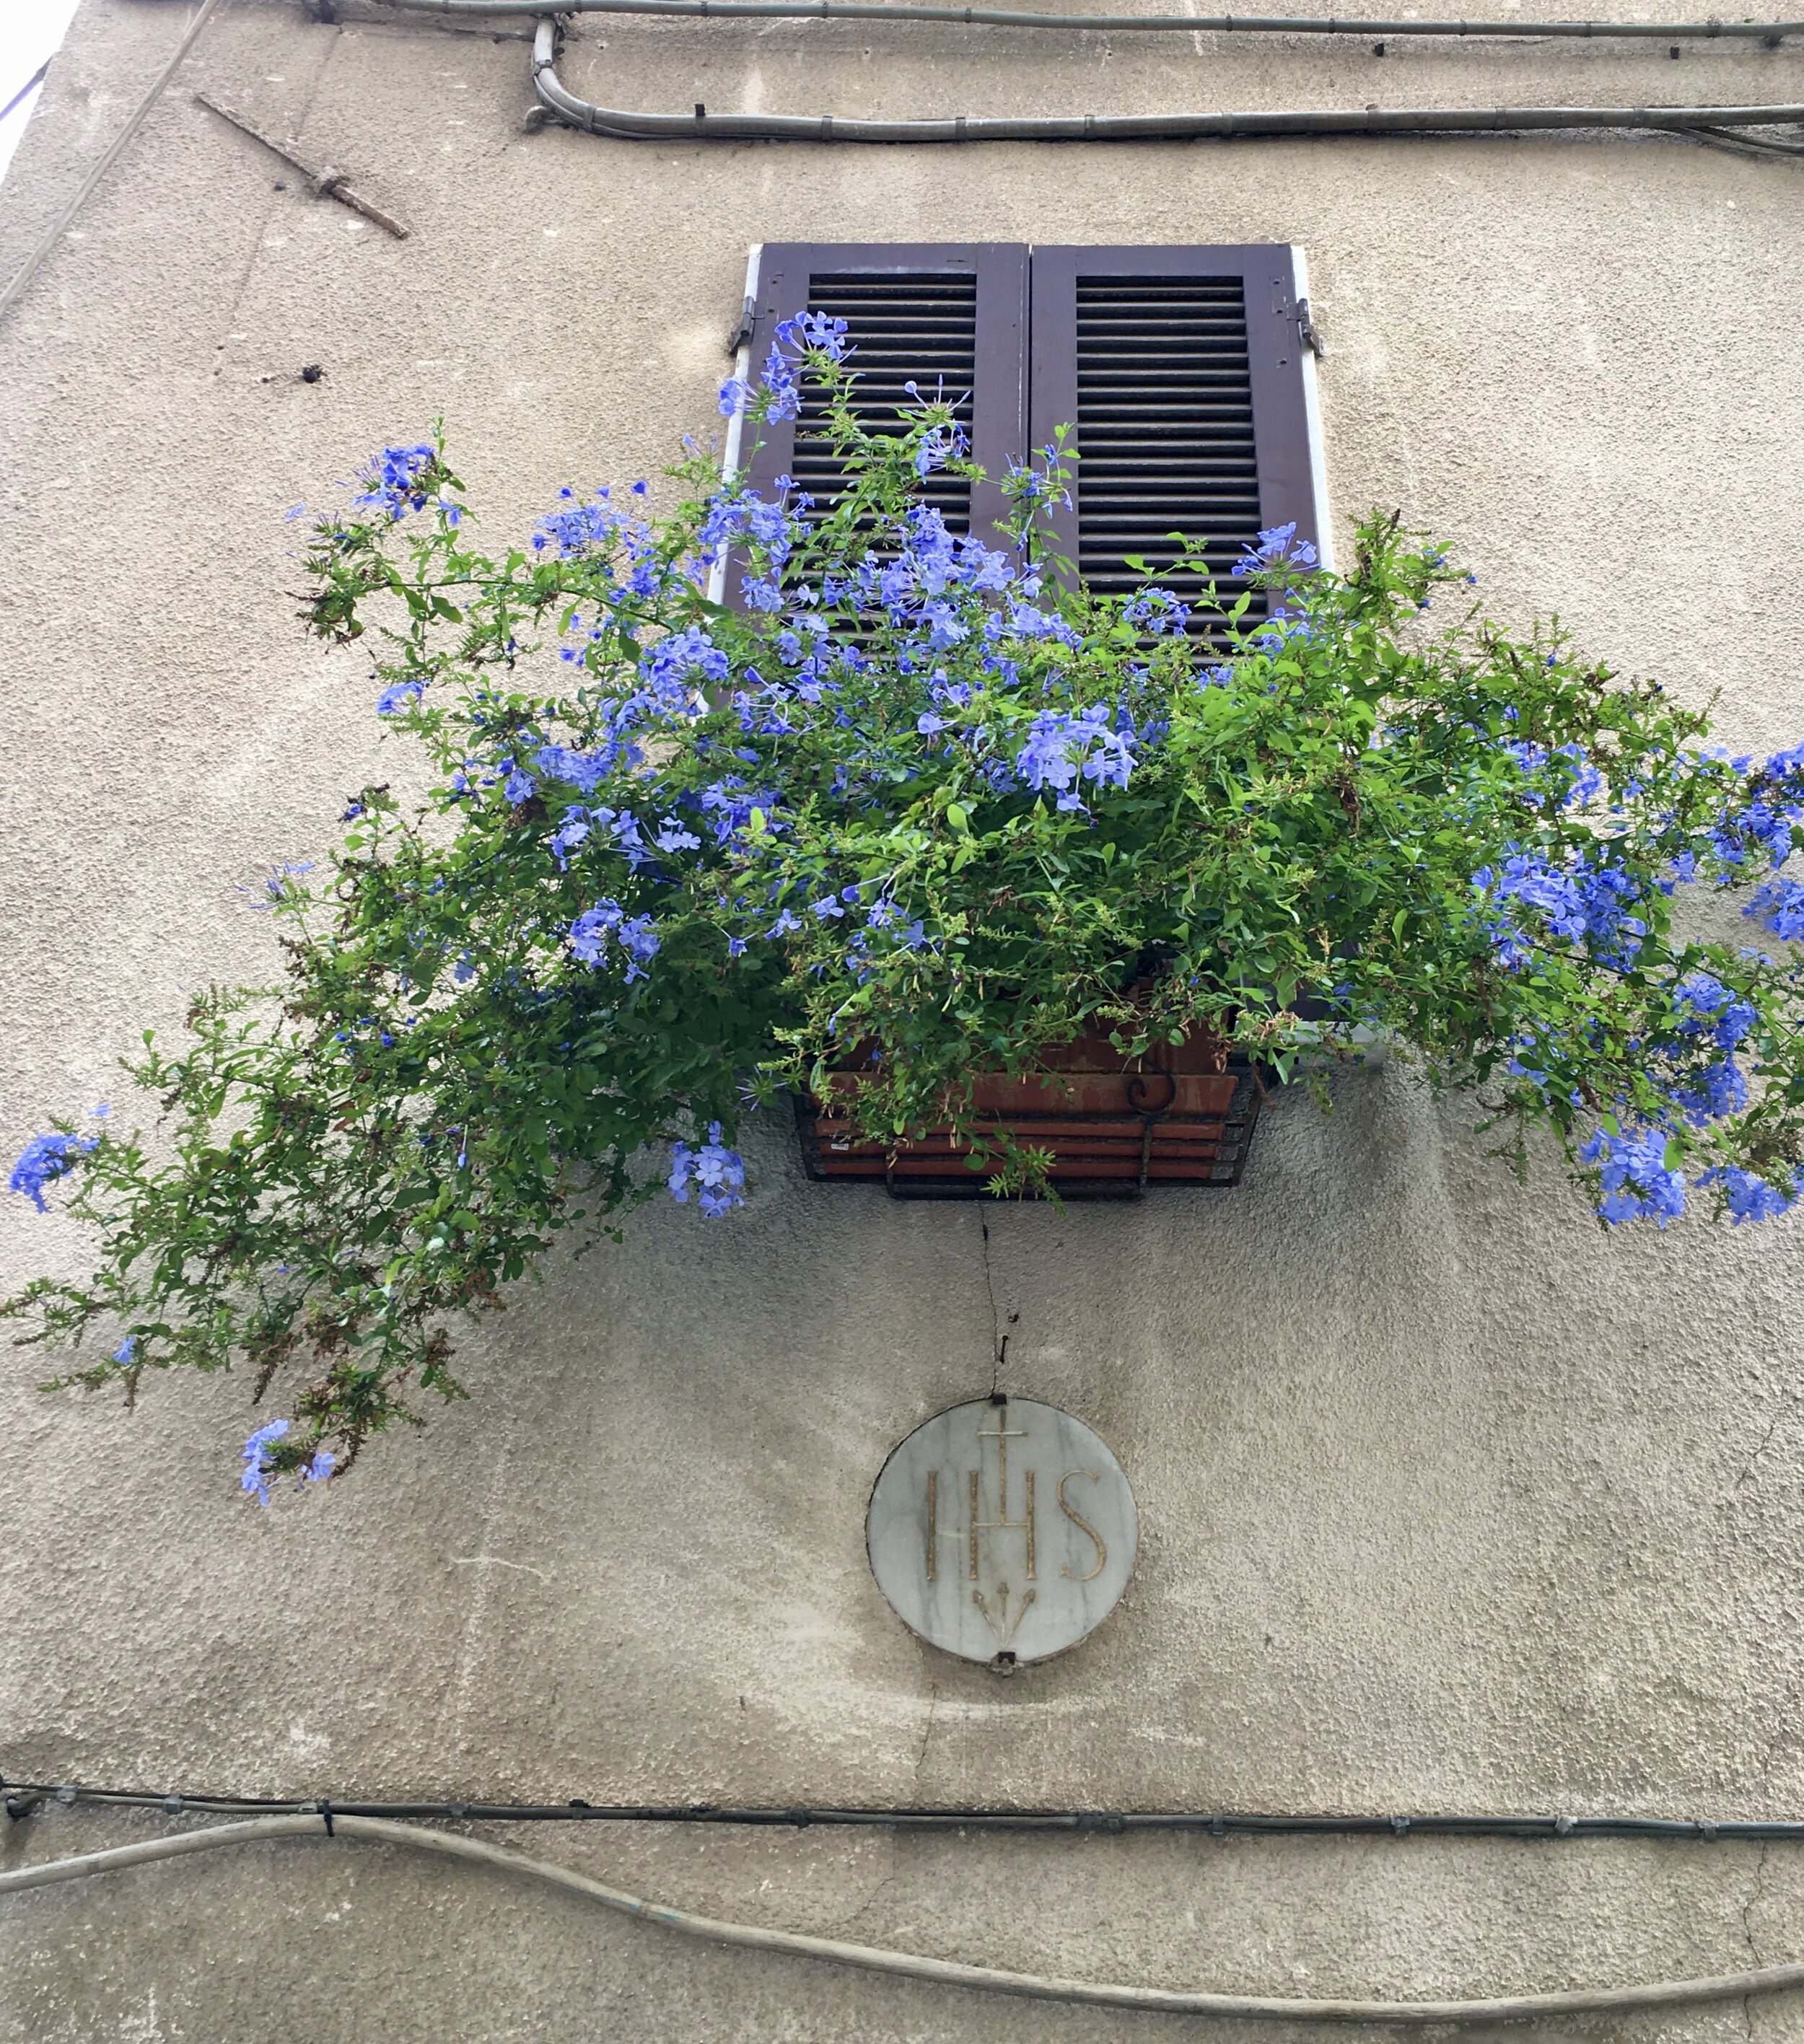 Flowers adorn many of the town's windows.